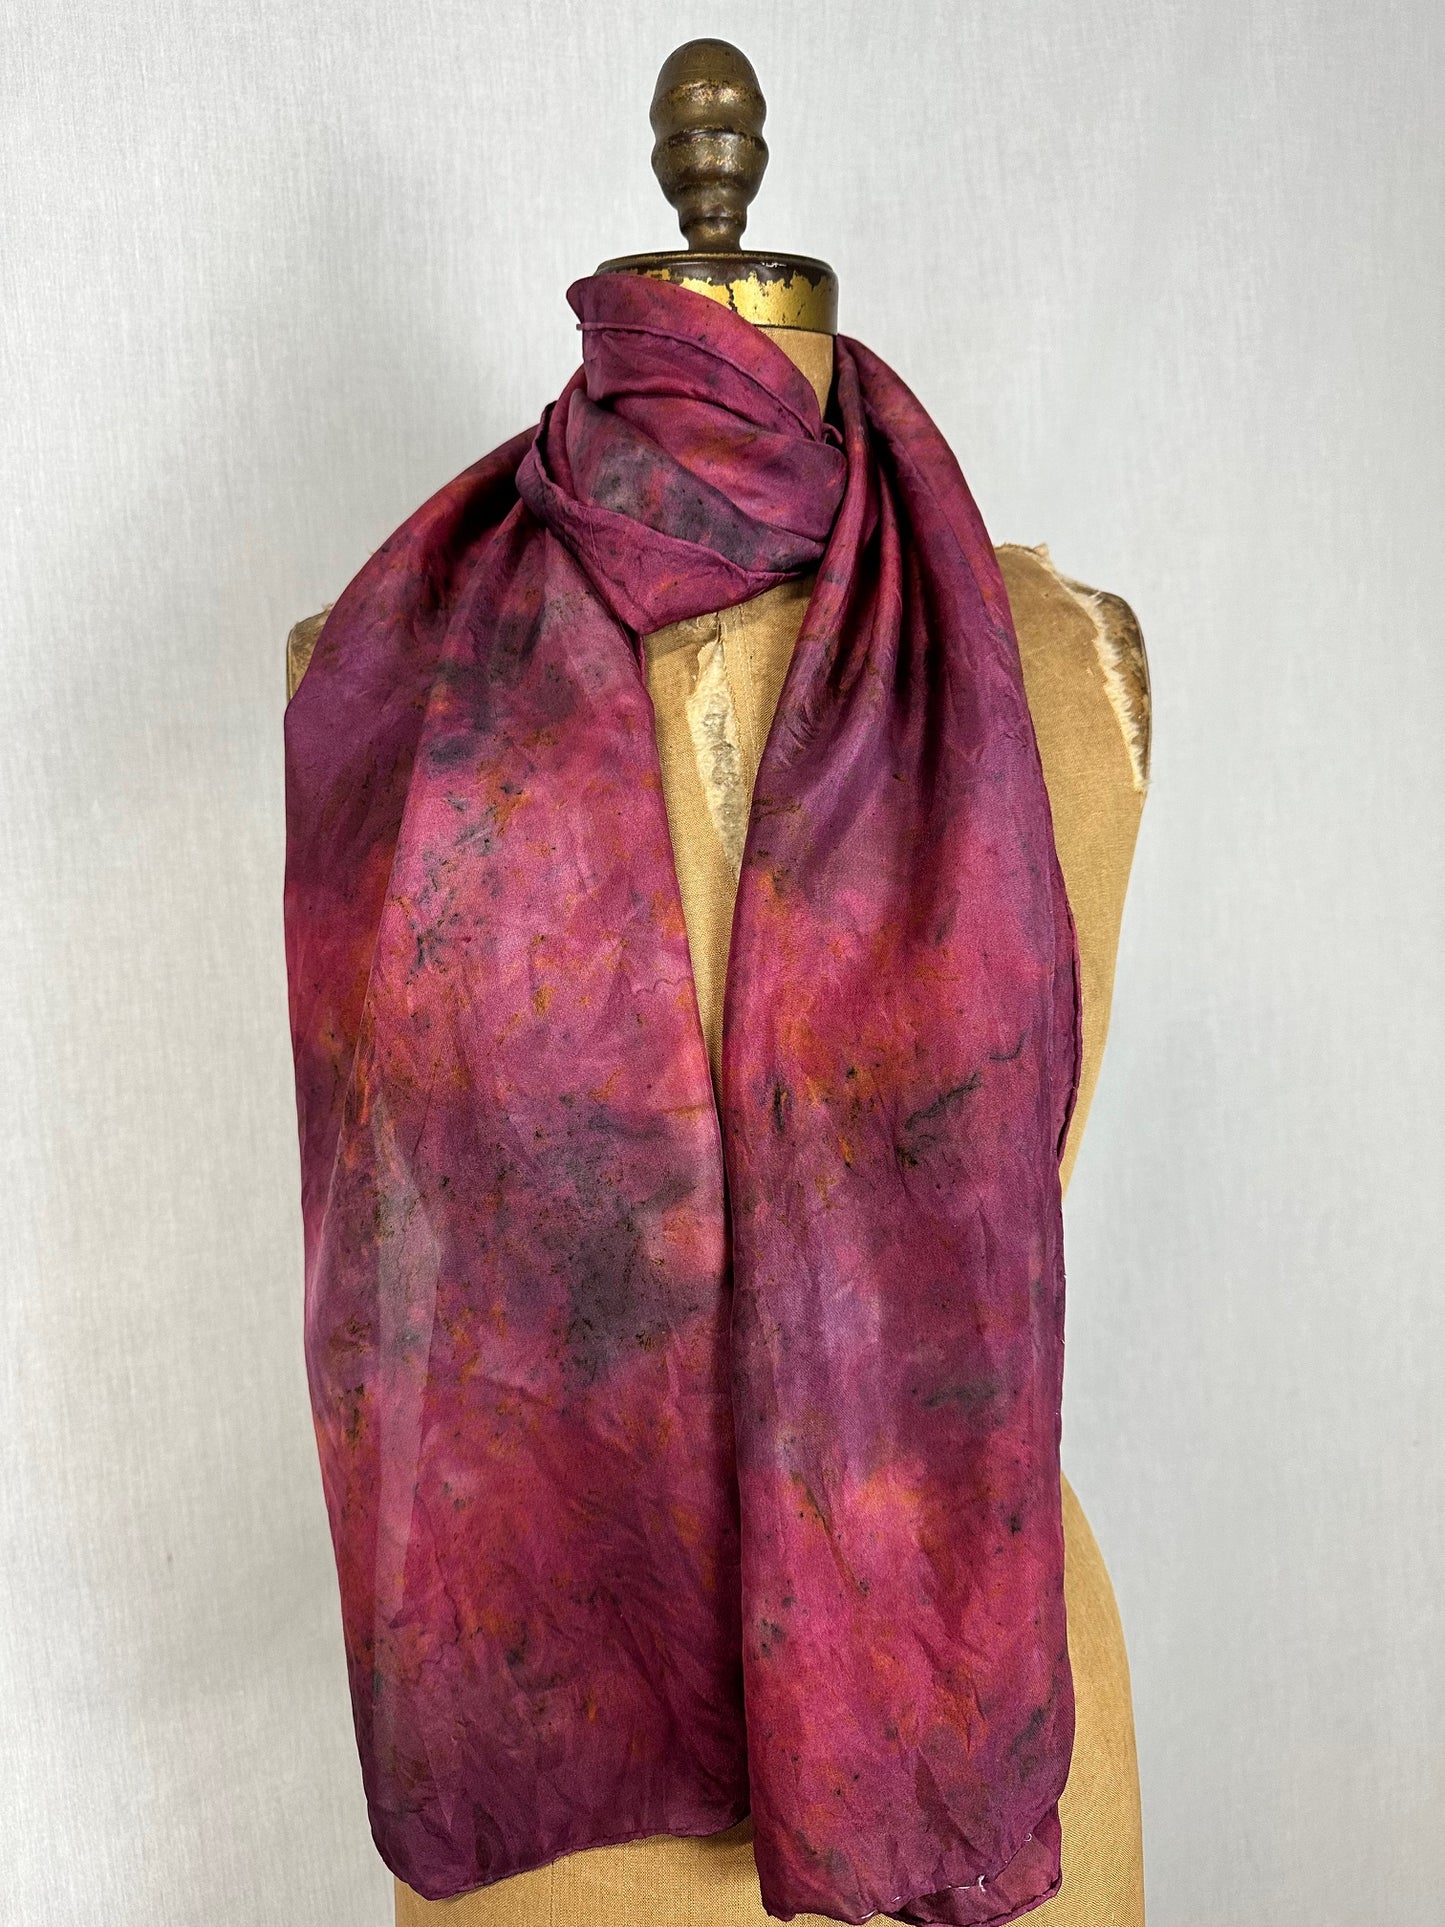 Silk Scarf - Dancing in the flames of the Dark Goddess